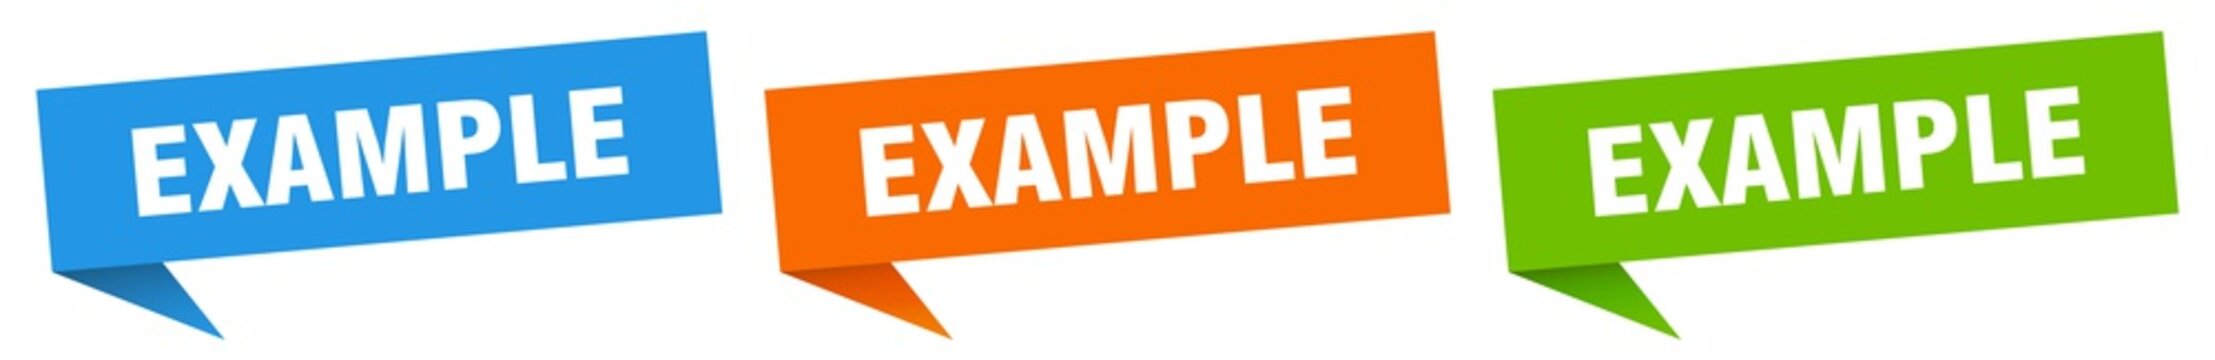 example banner. example speech bubble label set. example sign